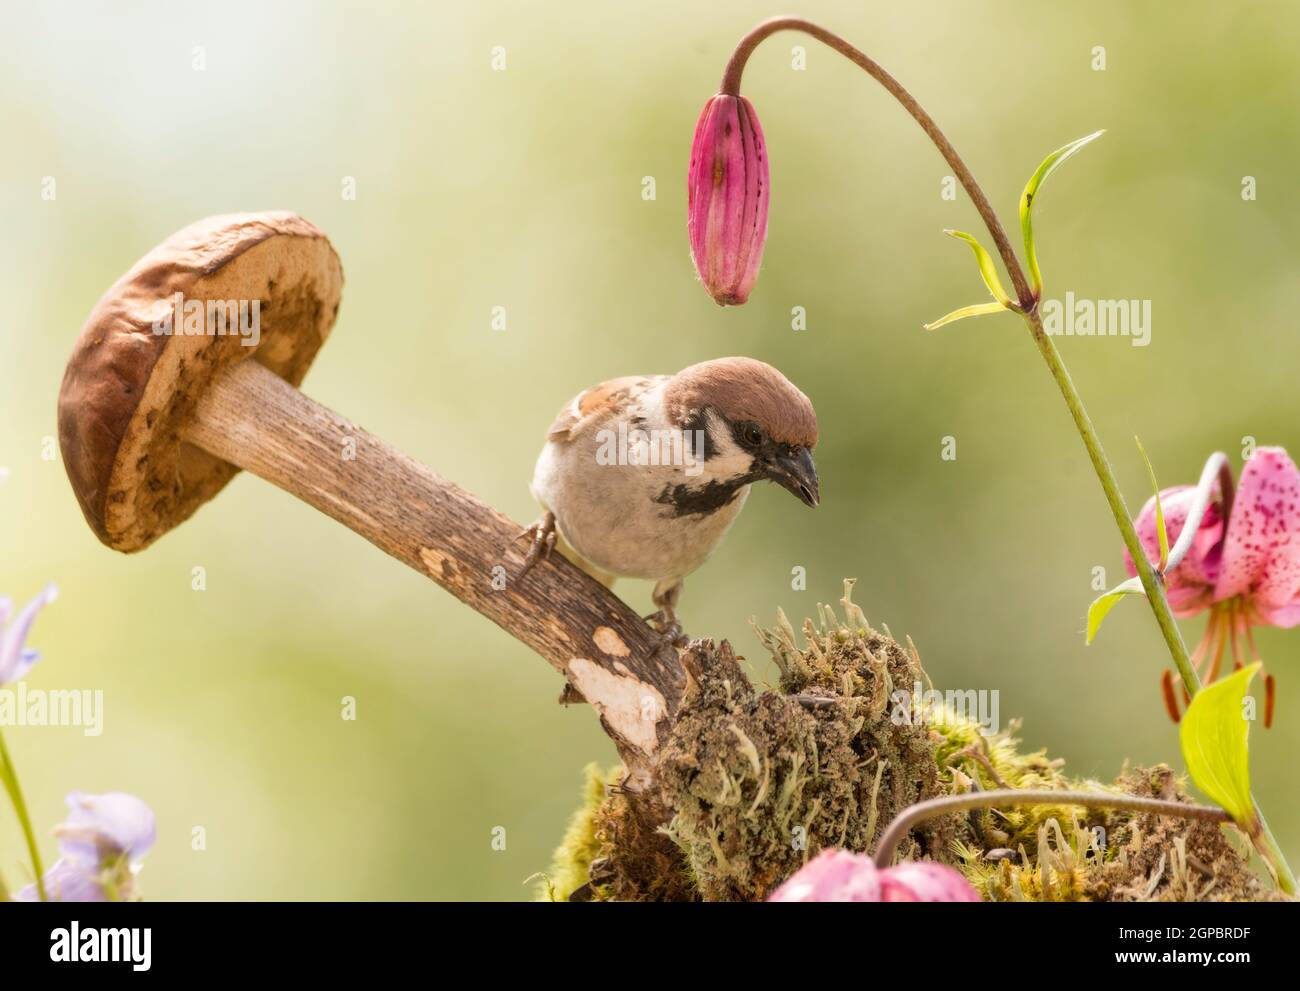 sparrow standing on mushroom with flower bud above Stock Photo